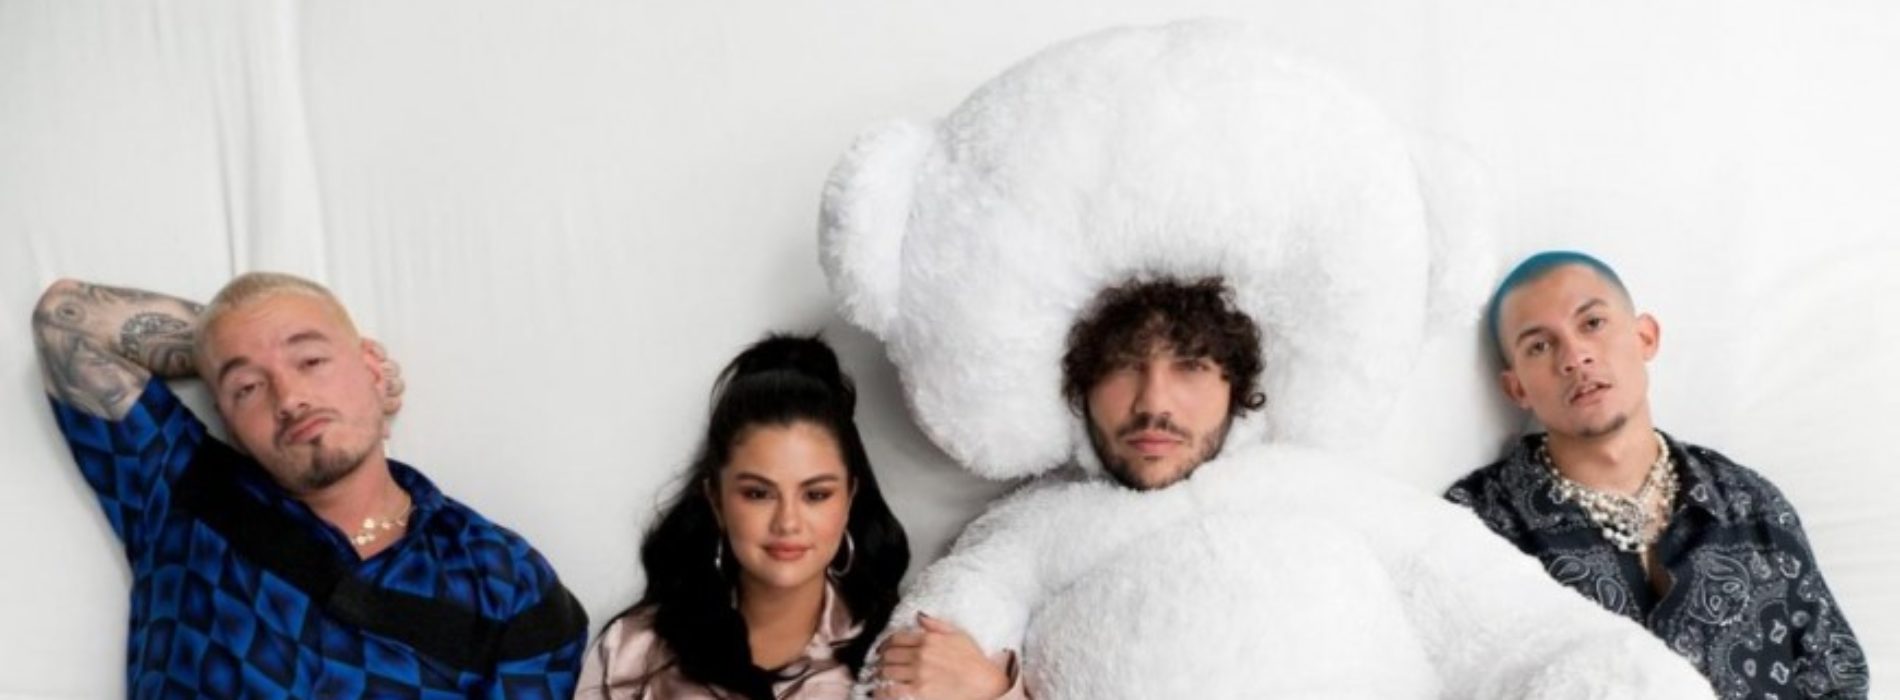 benny blanco, Tainy, Selena Gomez, J Balvin – I Can’t Get Enough (Official Music Video) – Mars 2019